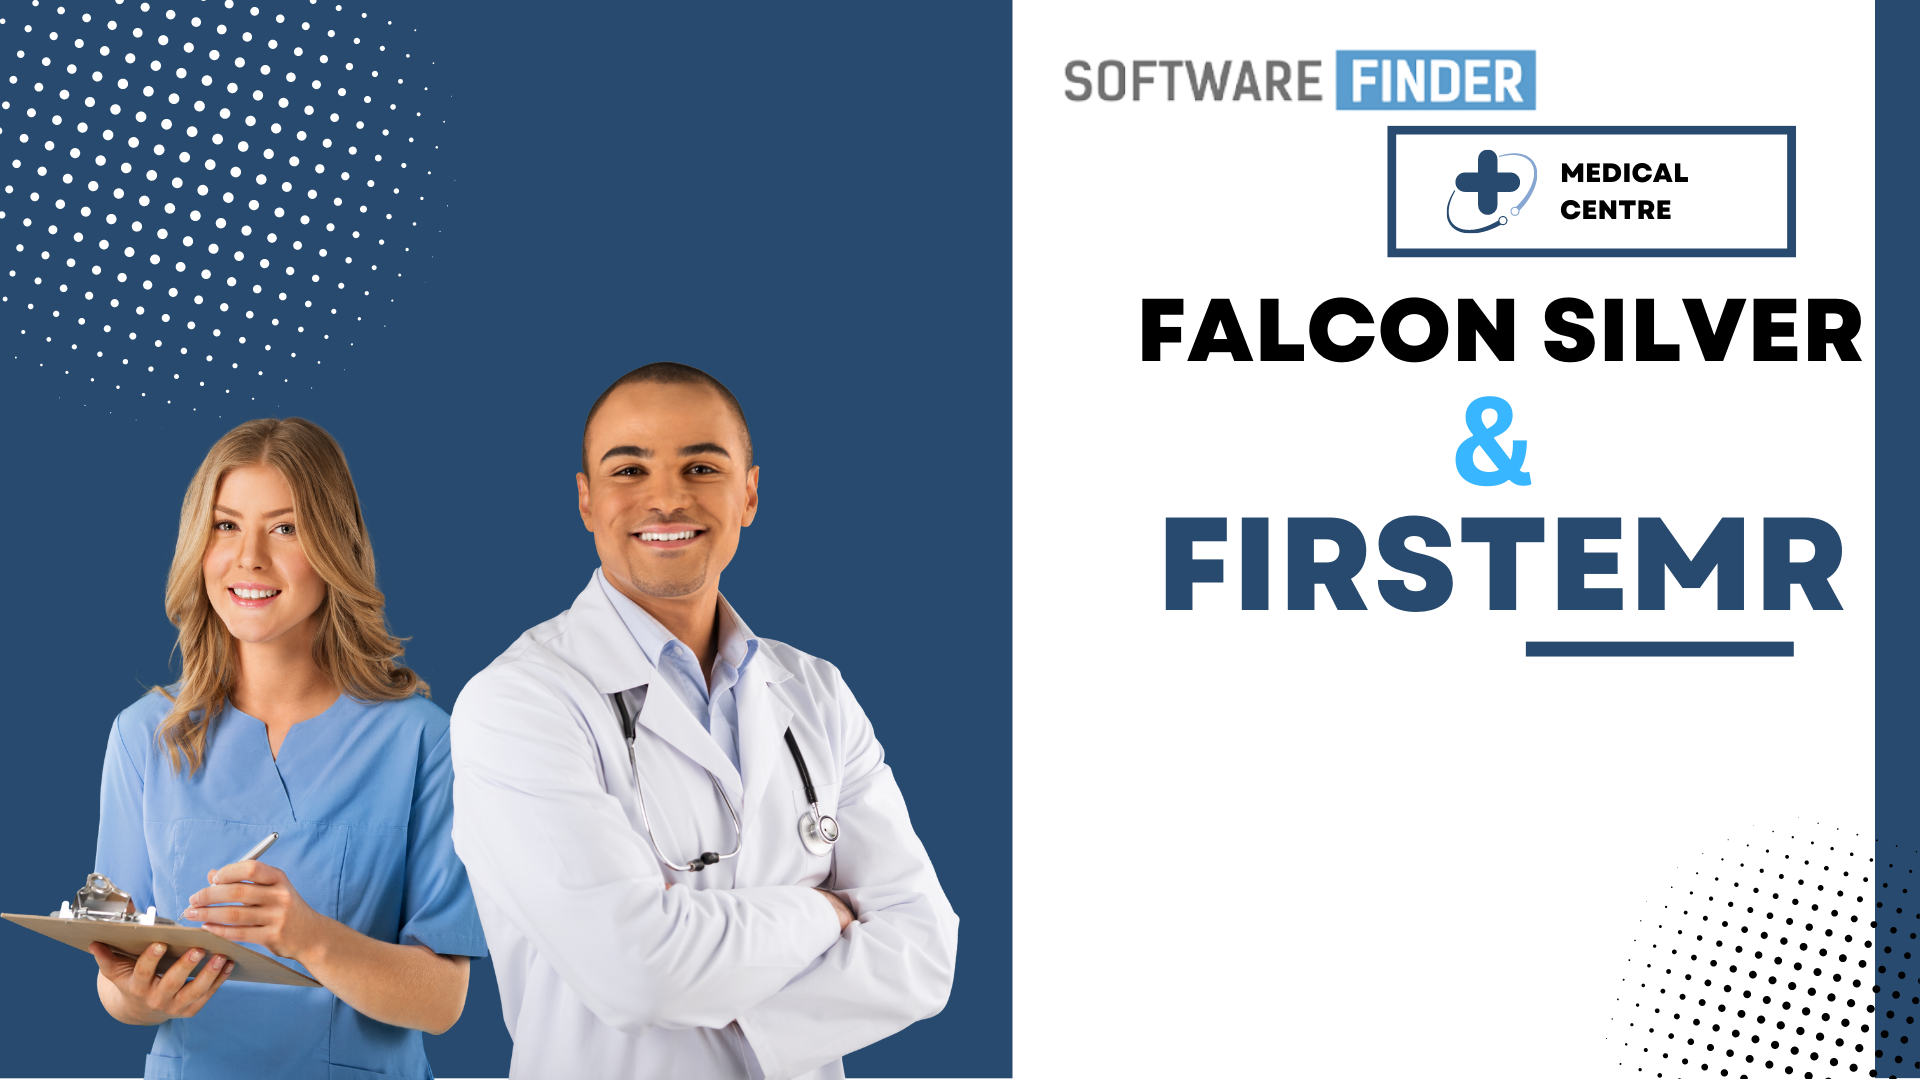 Falcon silver and firstEMR software